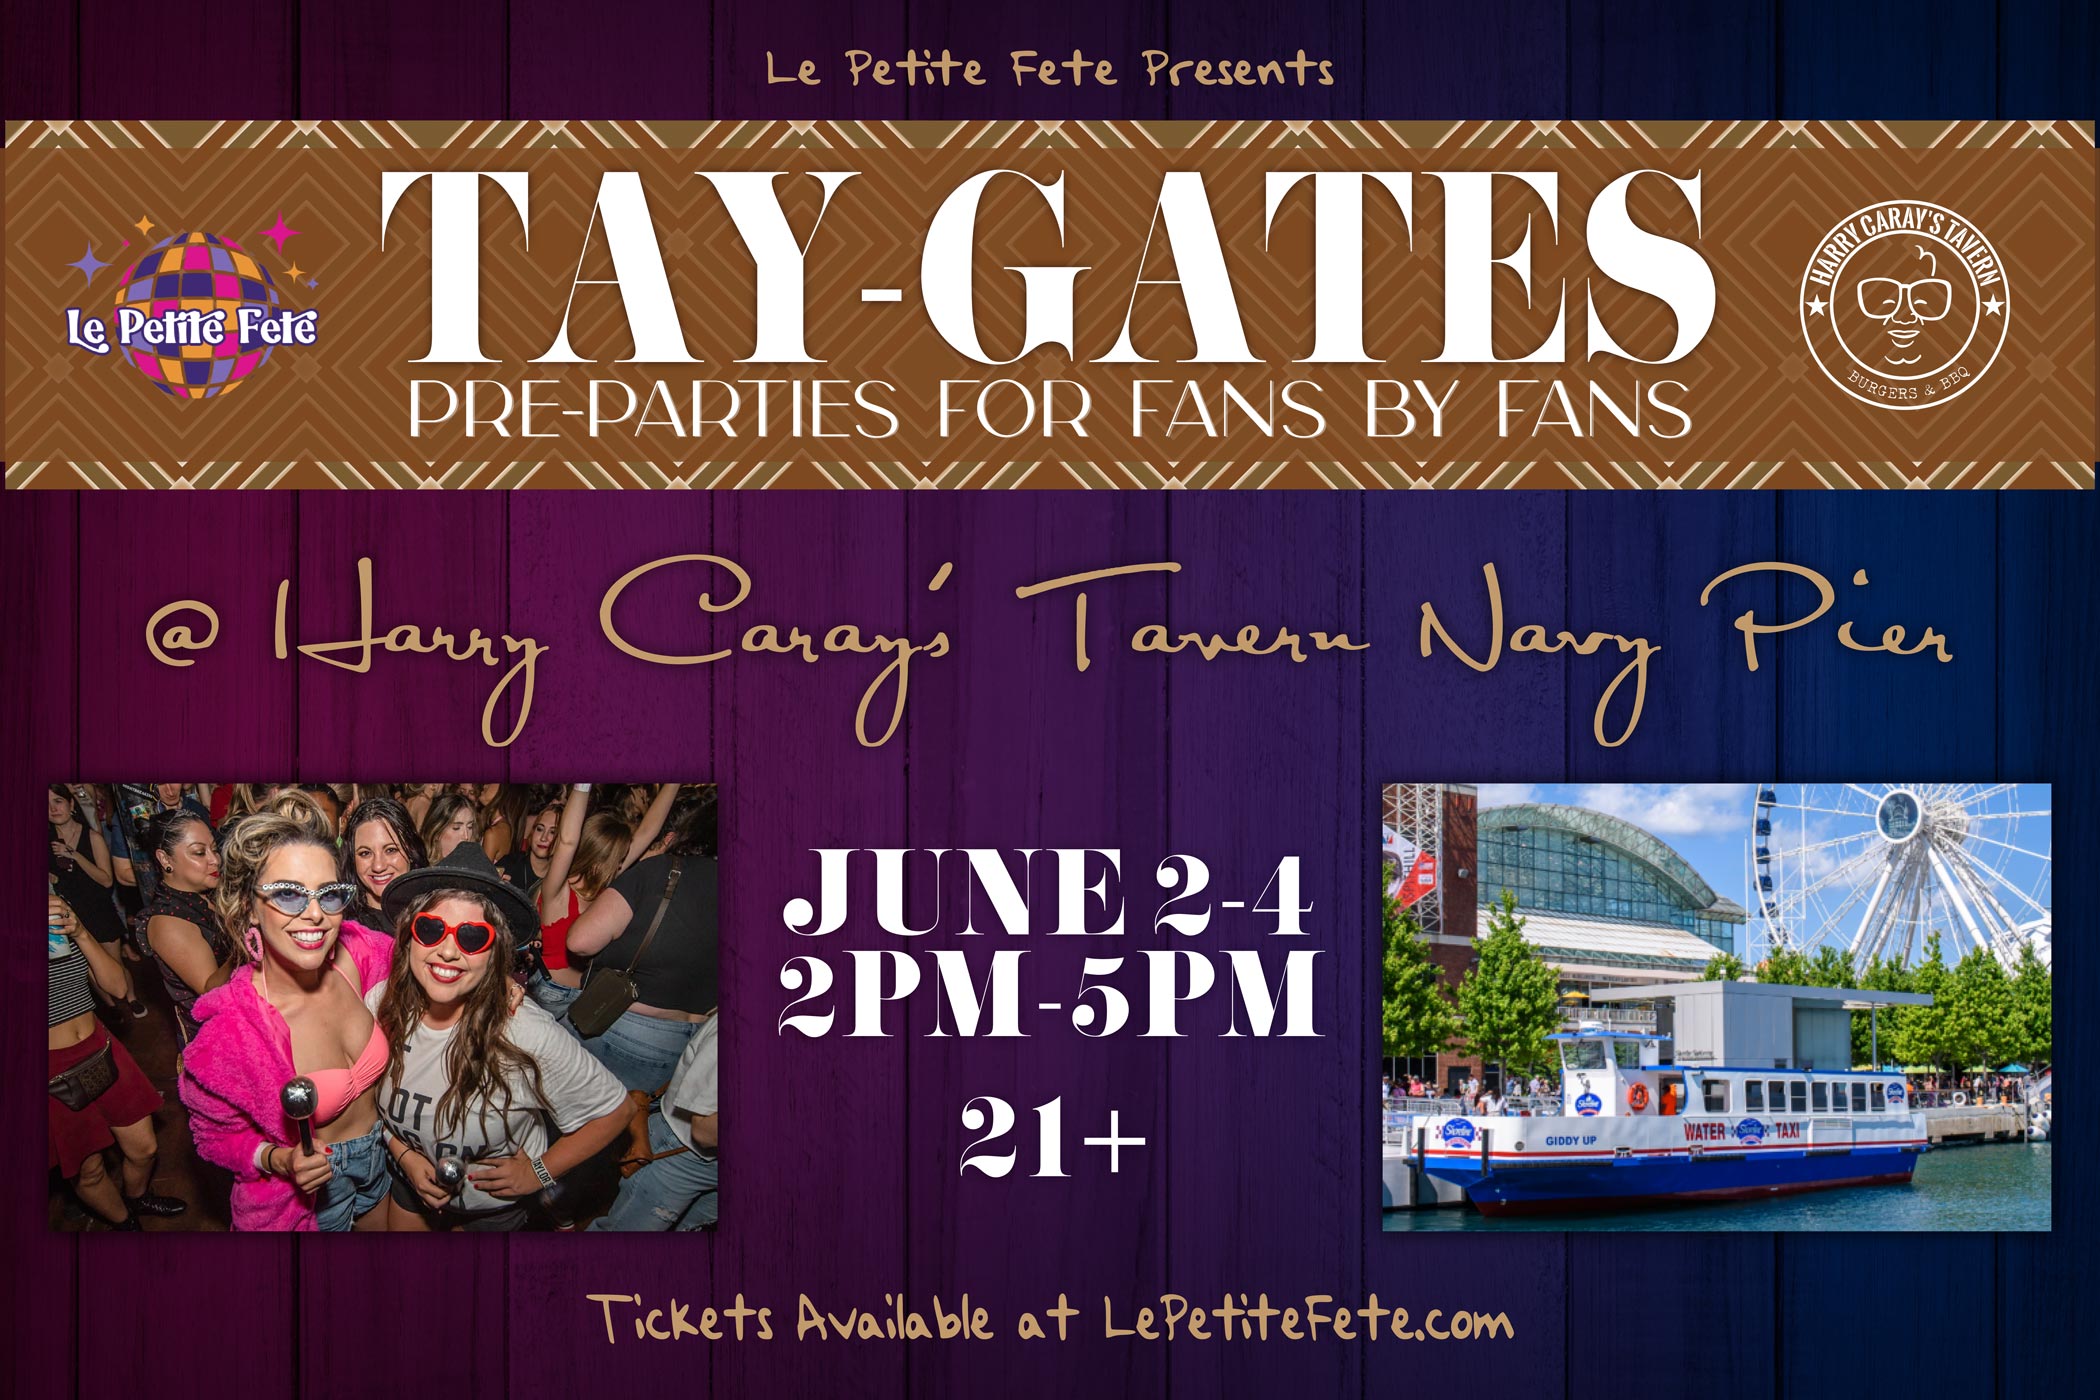 Tay Gates - Pre-Parties Tickets